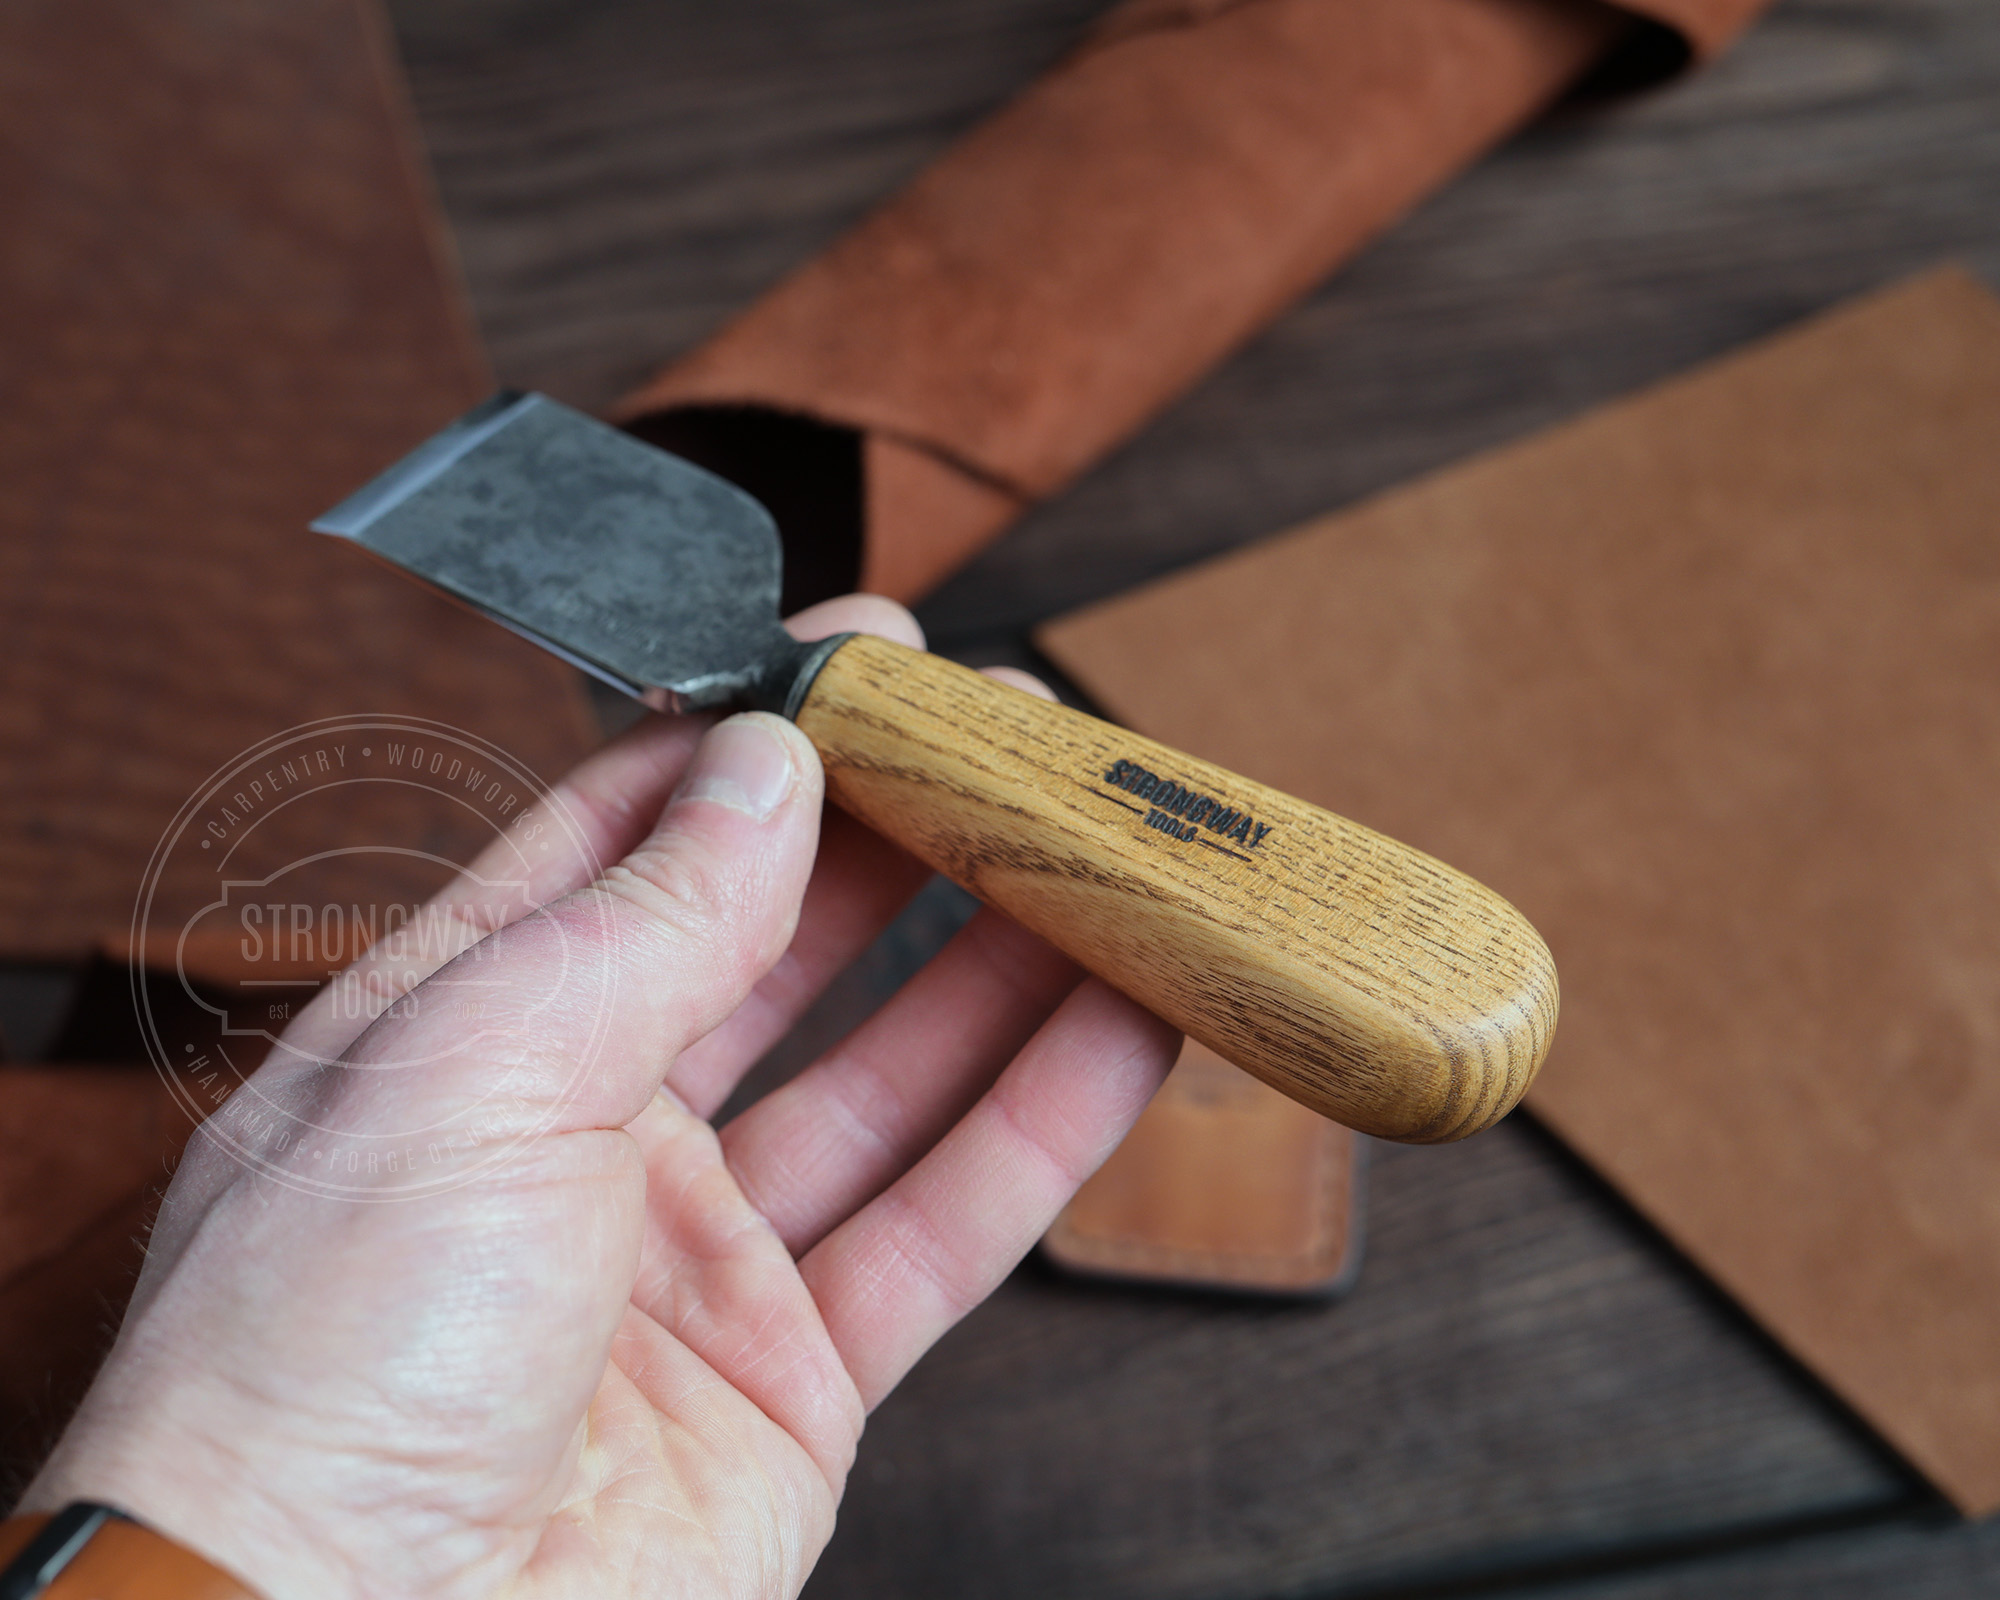 Nerd.blades - Skiving knife for leather work